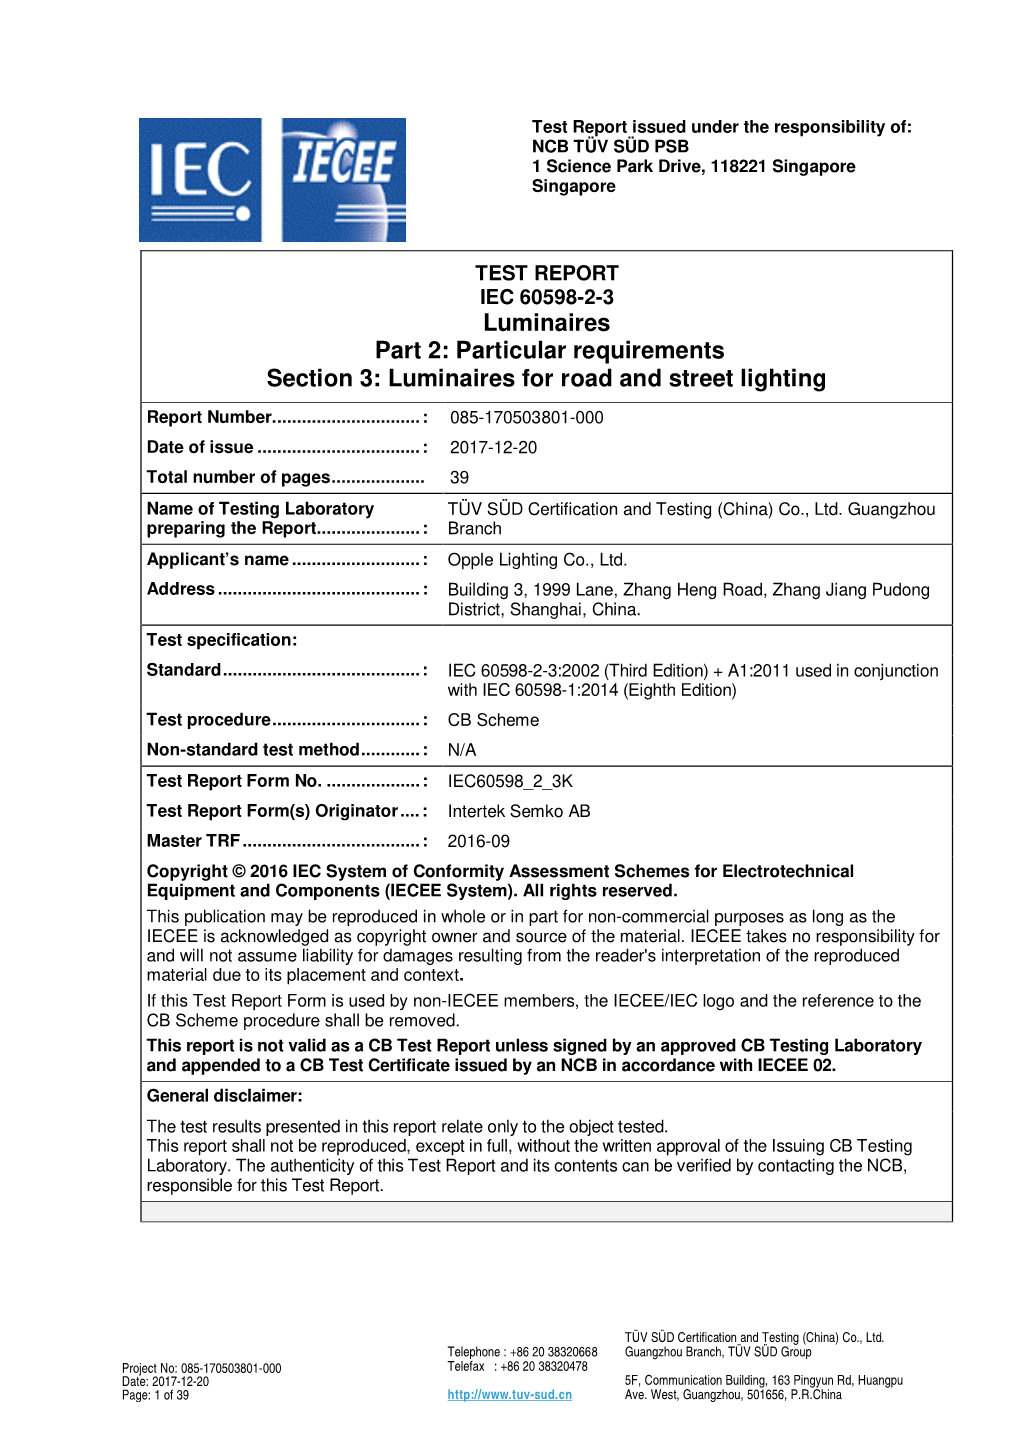 Particular Requirements Section 3: Luminaires for Road and Street Lighting